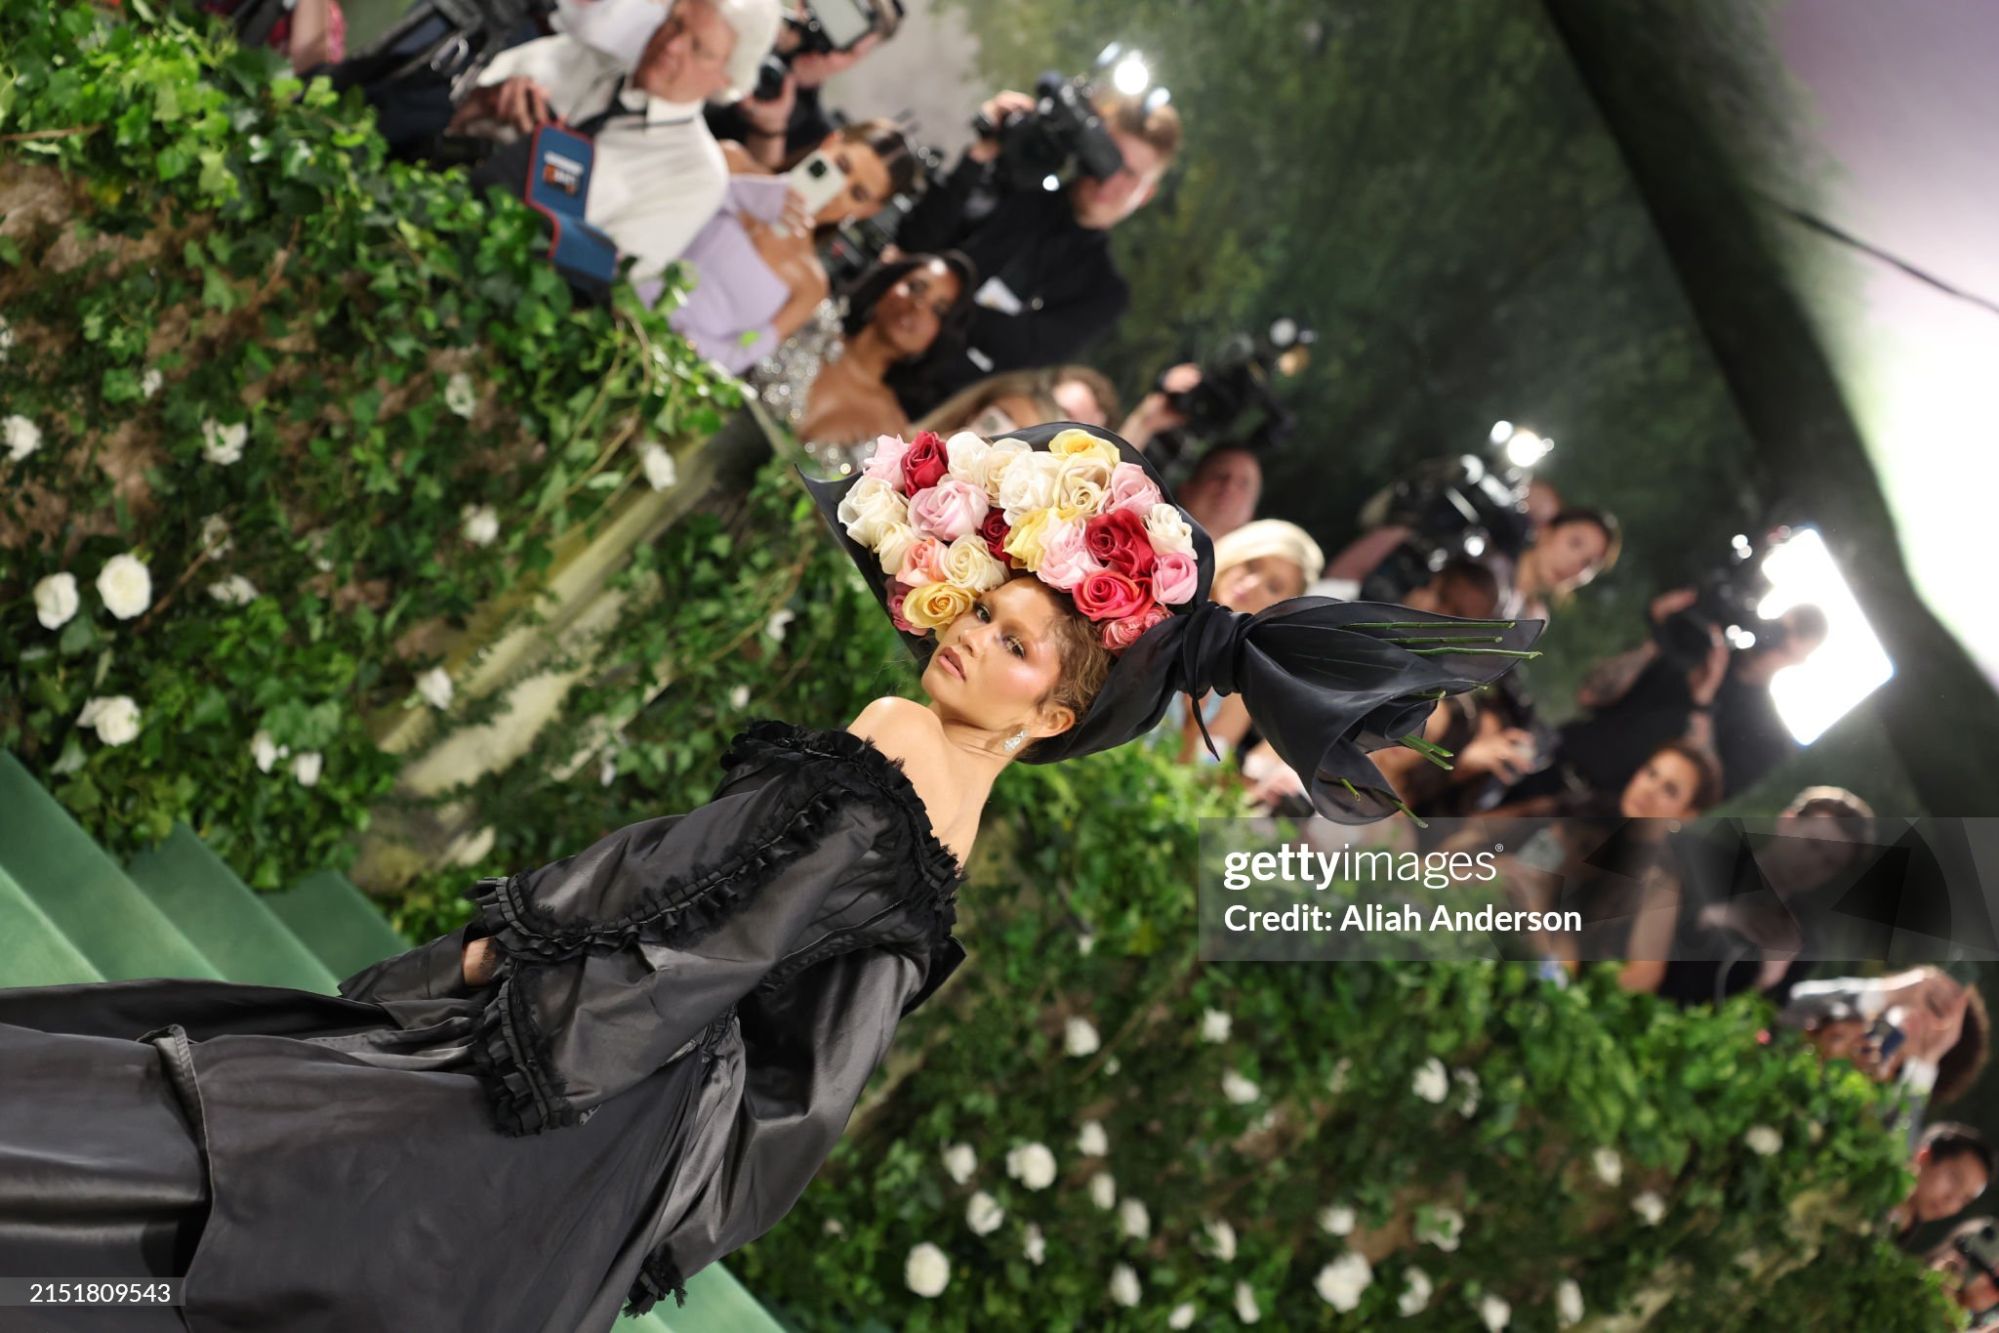 gettyimages-2151809543-2048x2048.jpg